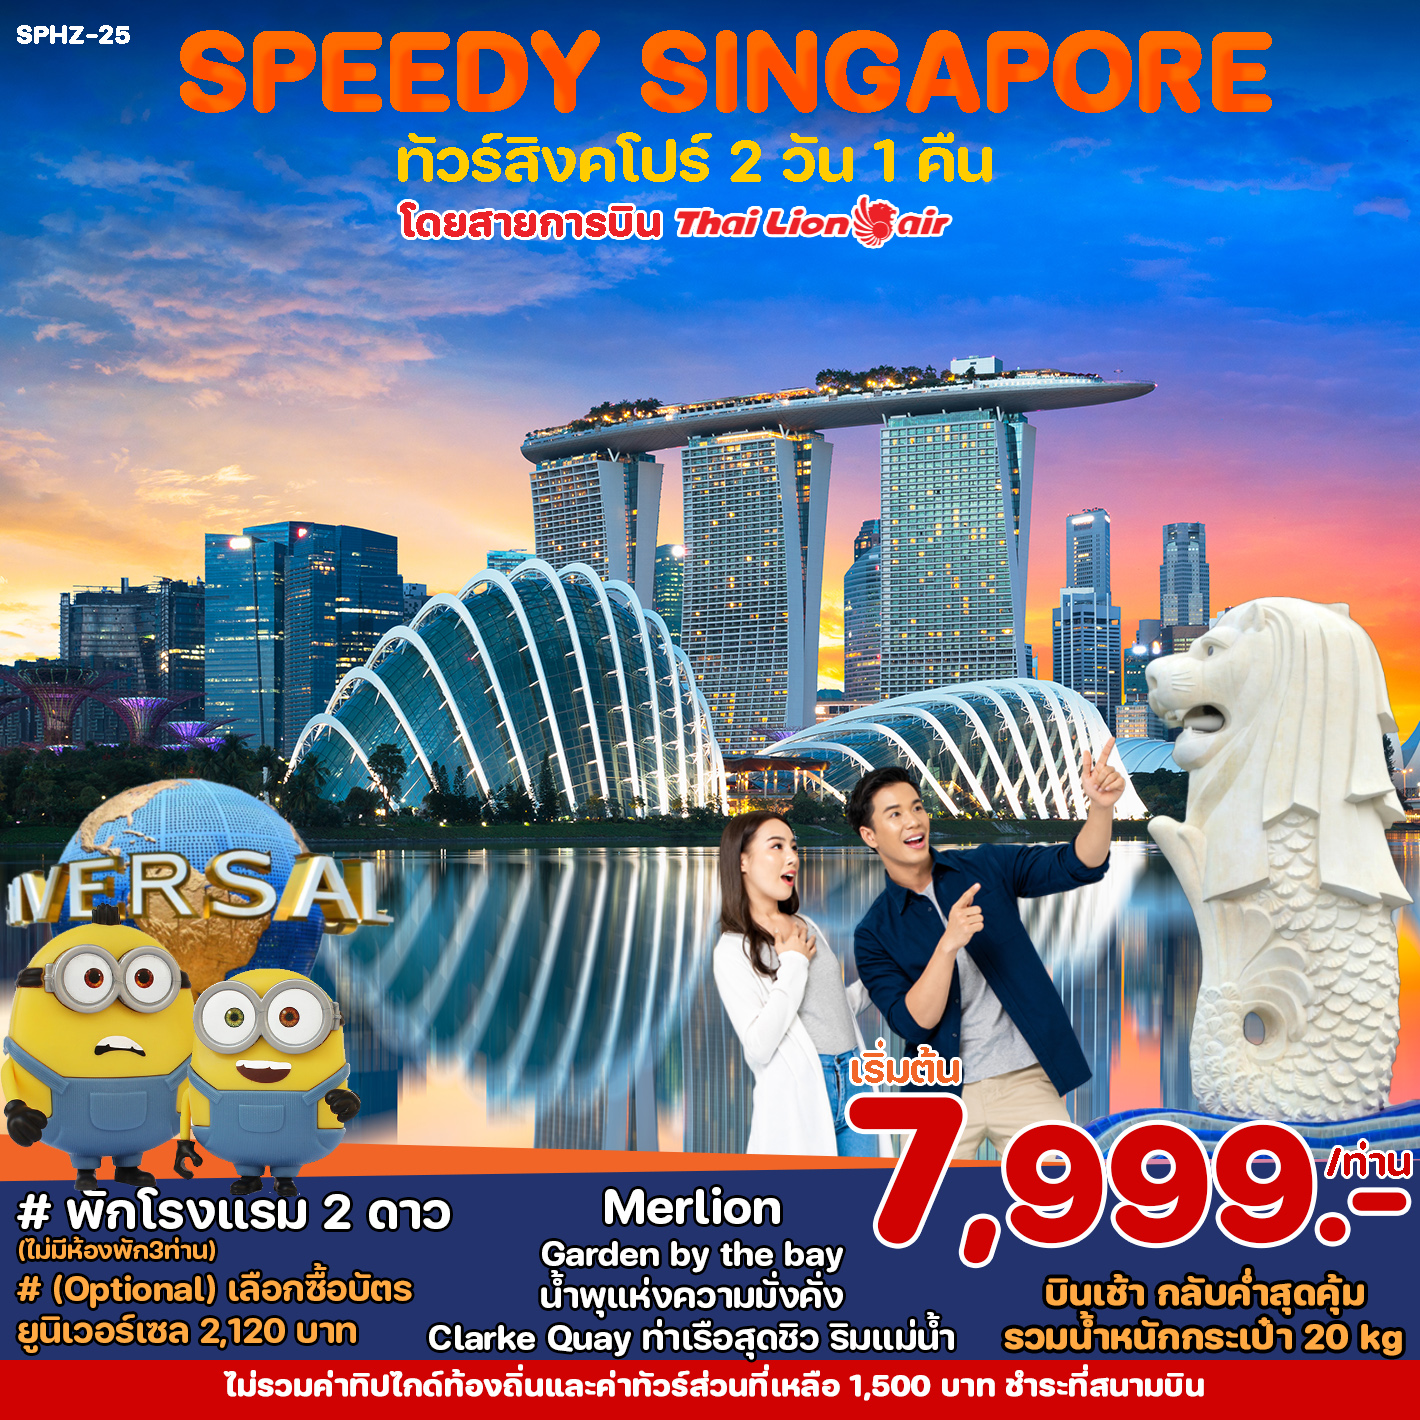 SPEEDY PACKED SINGAPORE 2D1N by SL